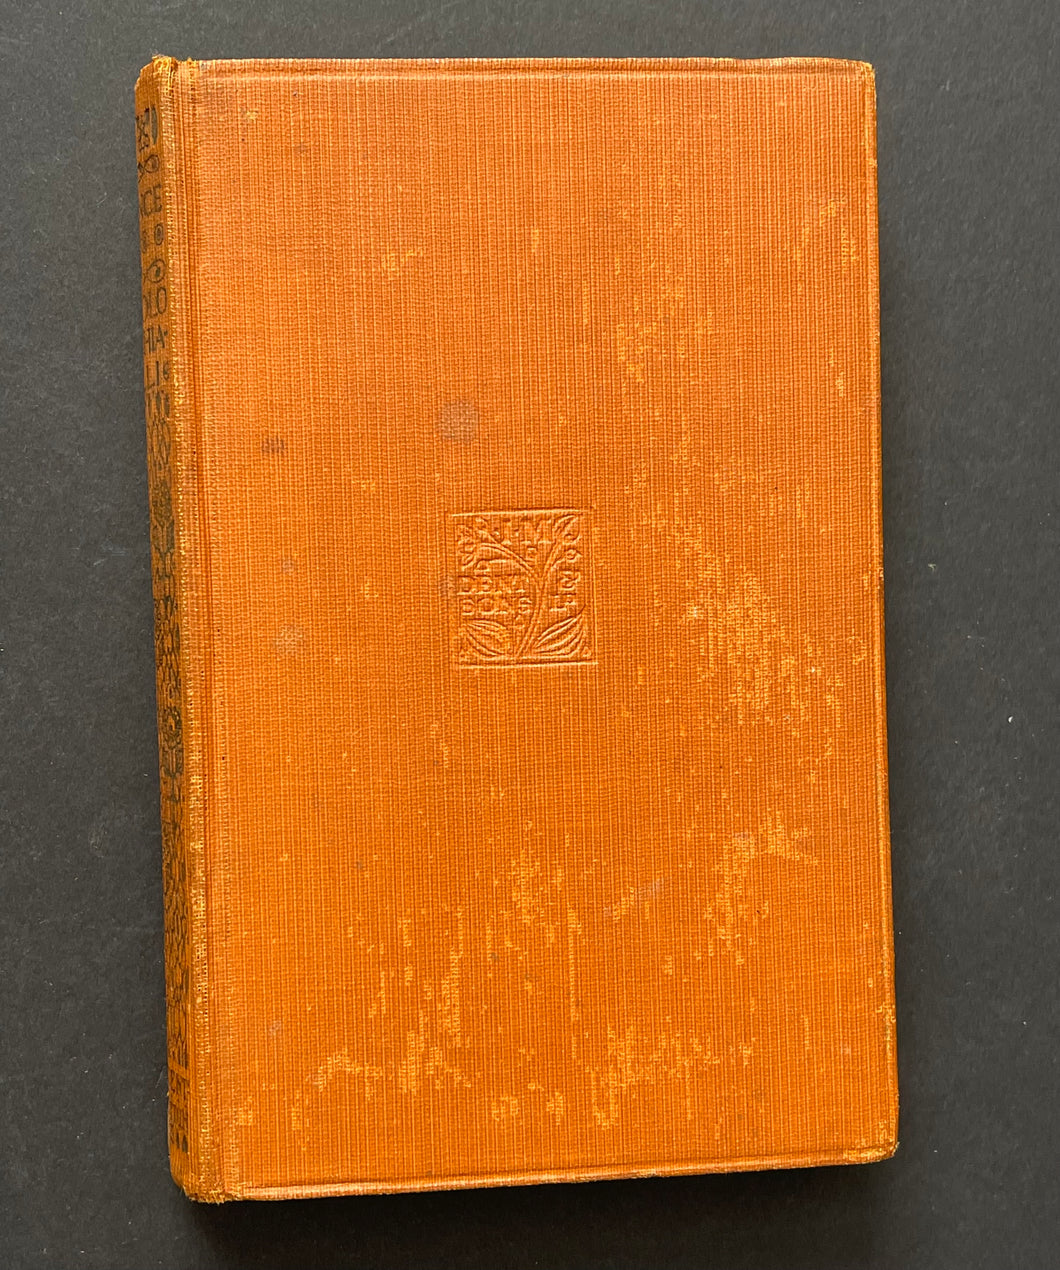 Antique 1920 “The Prince” by Machiavelli Book